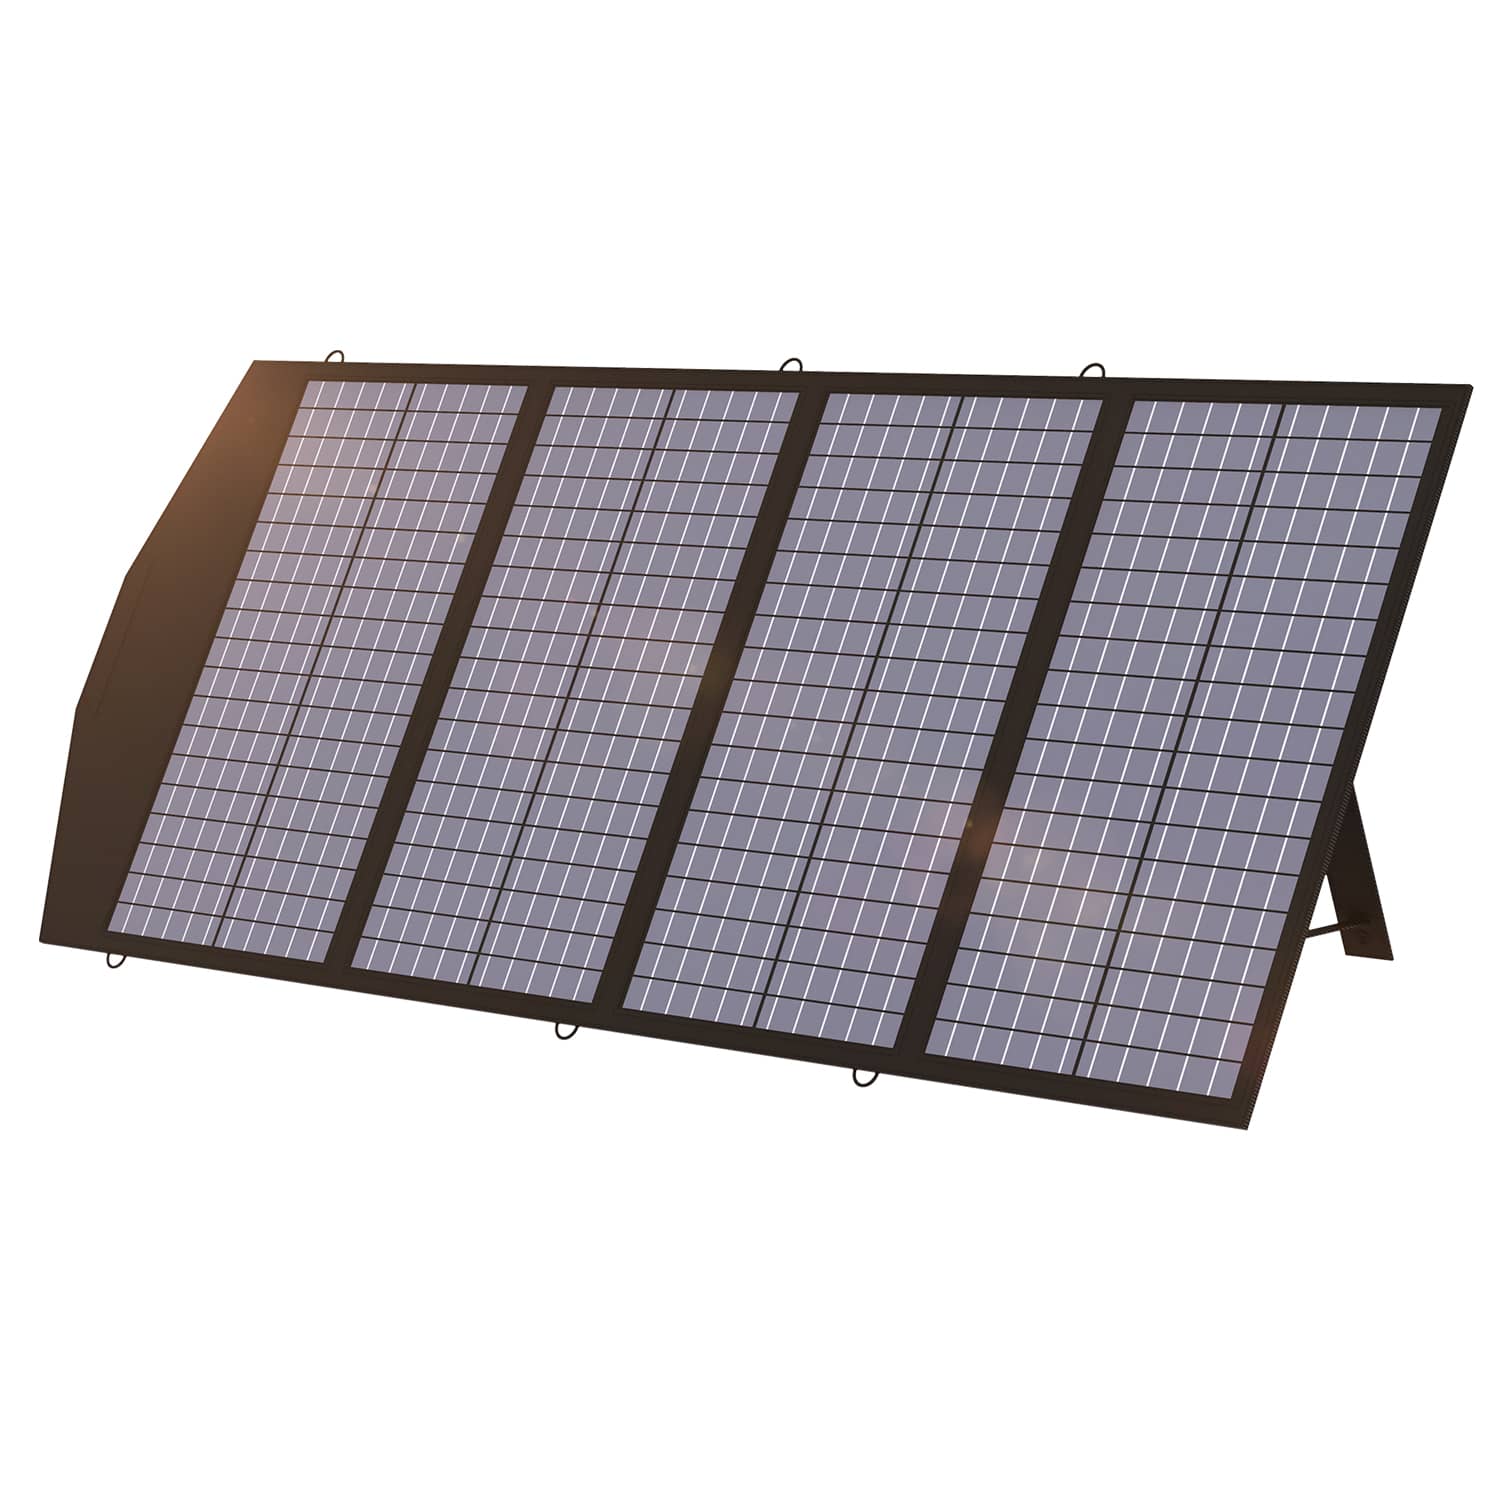 ALLPOWERS R600 Solar Generator 600W Portable Power Station 299Wh with SP029 140W Solar Panel